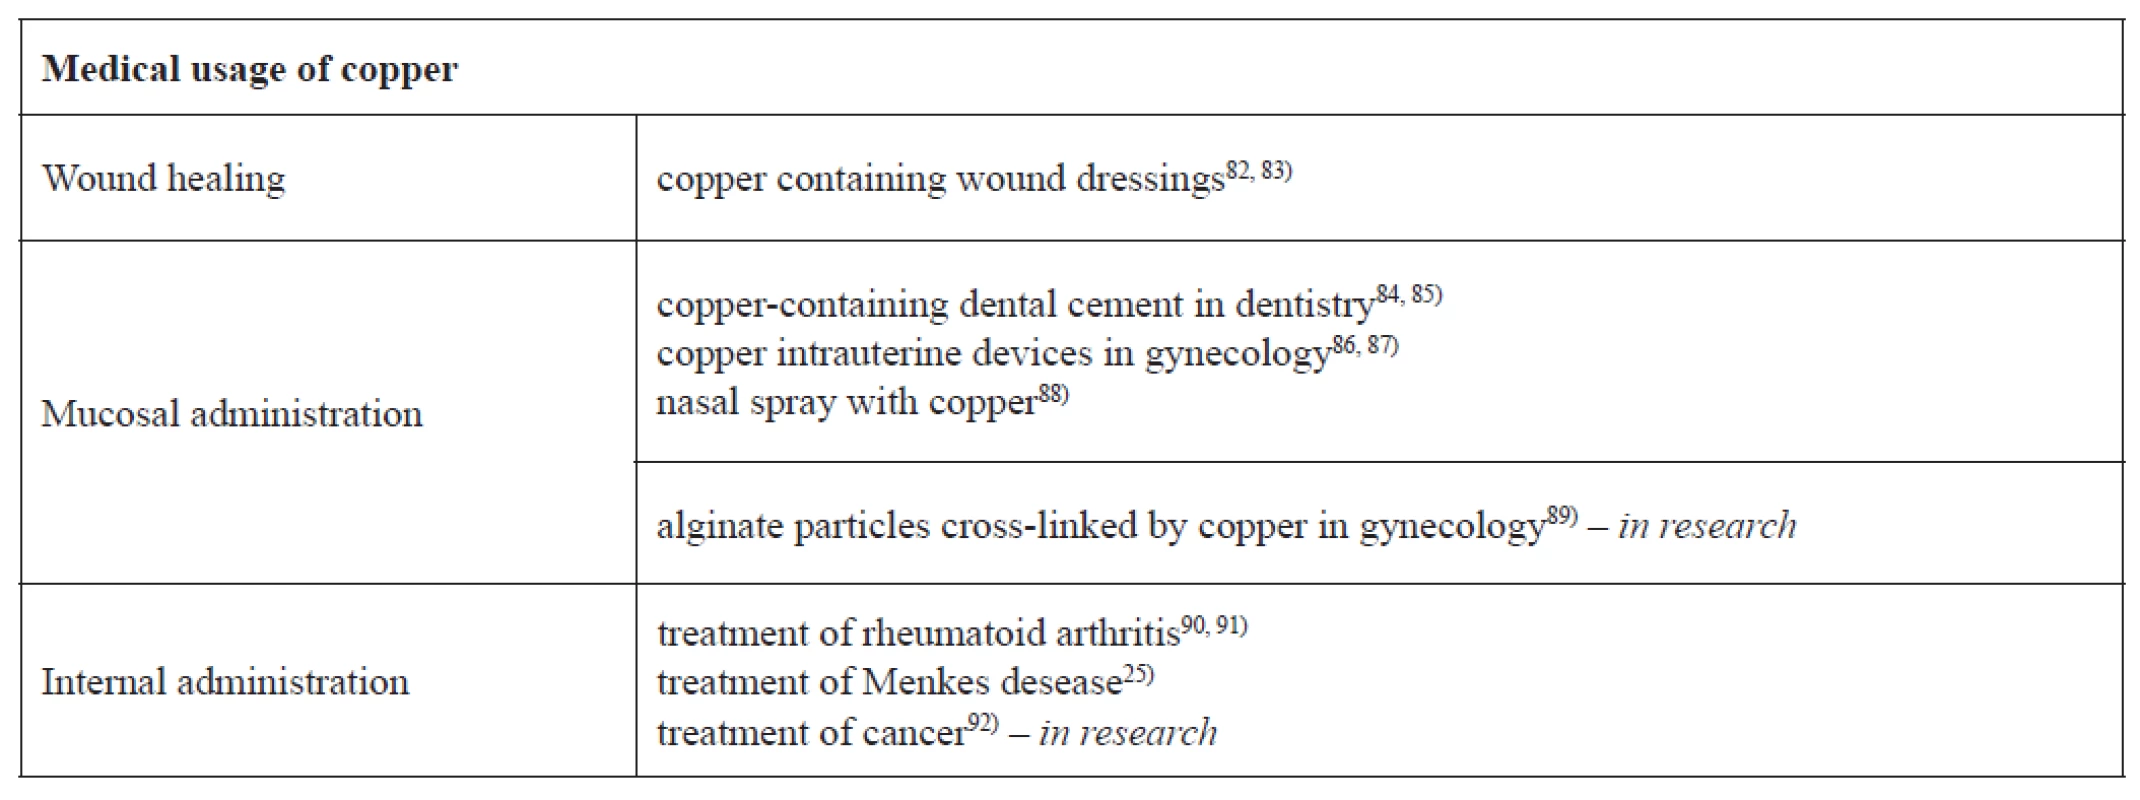 Current and future potential applications of copper and copper compounds in the medical area